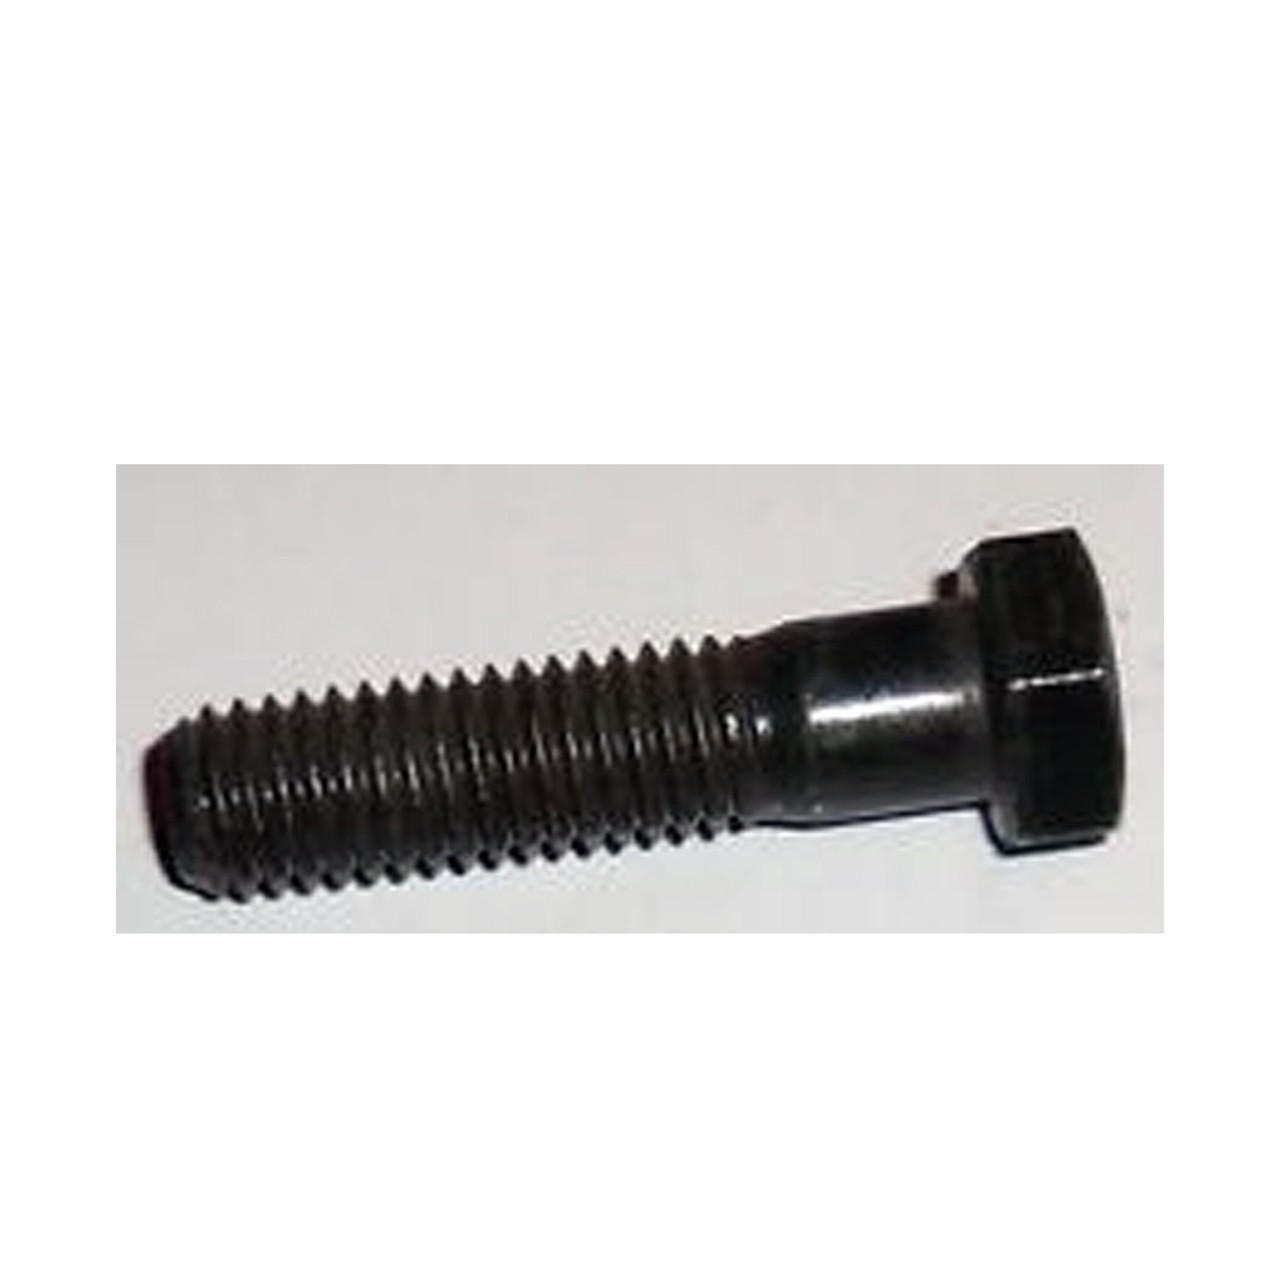 Polaris New OEM Snowmobile Bolt Classic,Touring,Lite,Deluxe,Long,Trak,Sprot,RXL